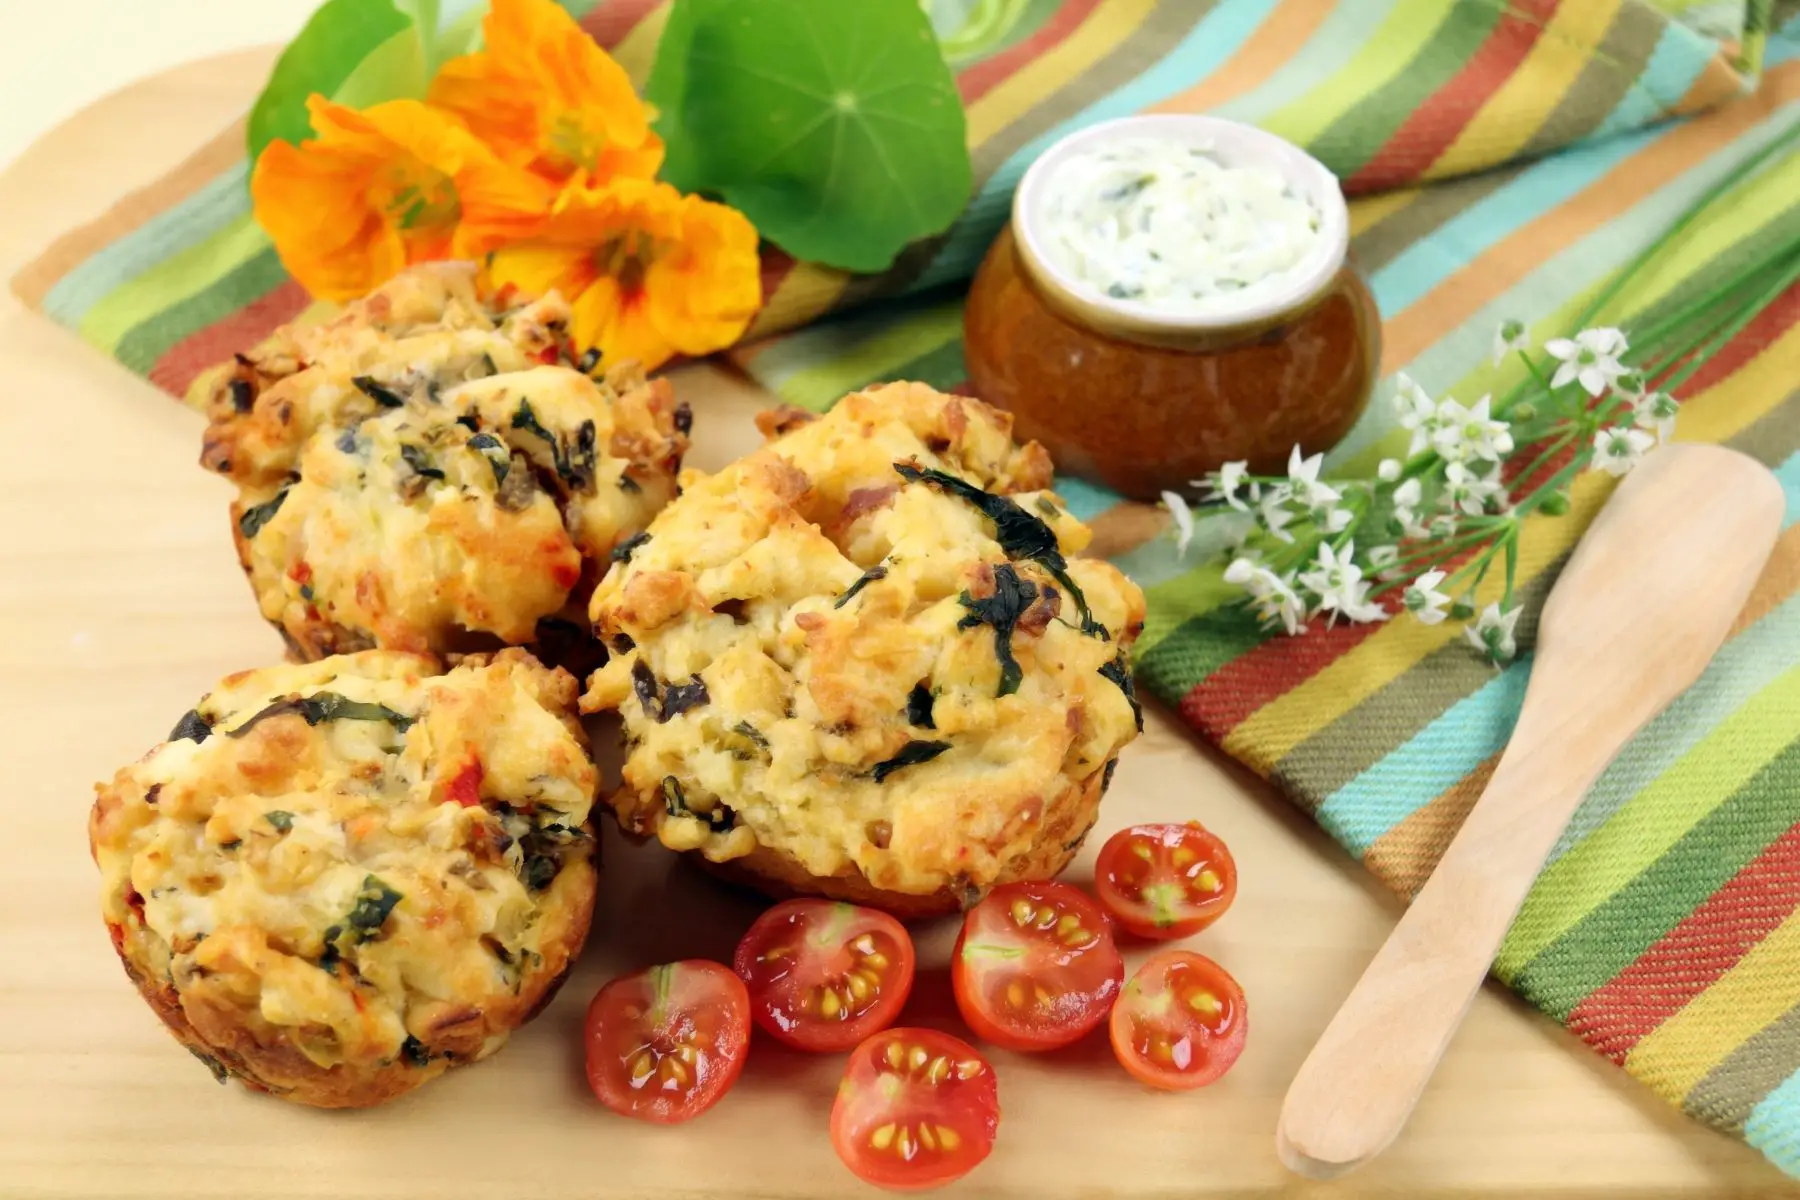 Savory Scones for lunch